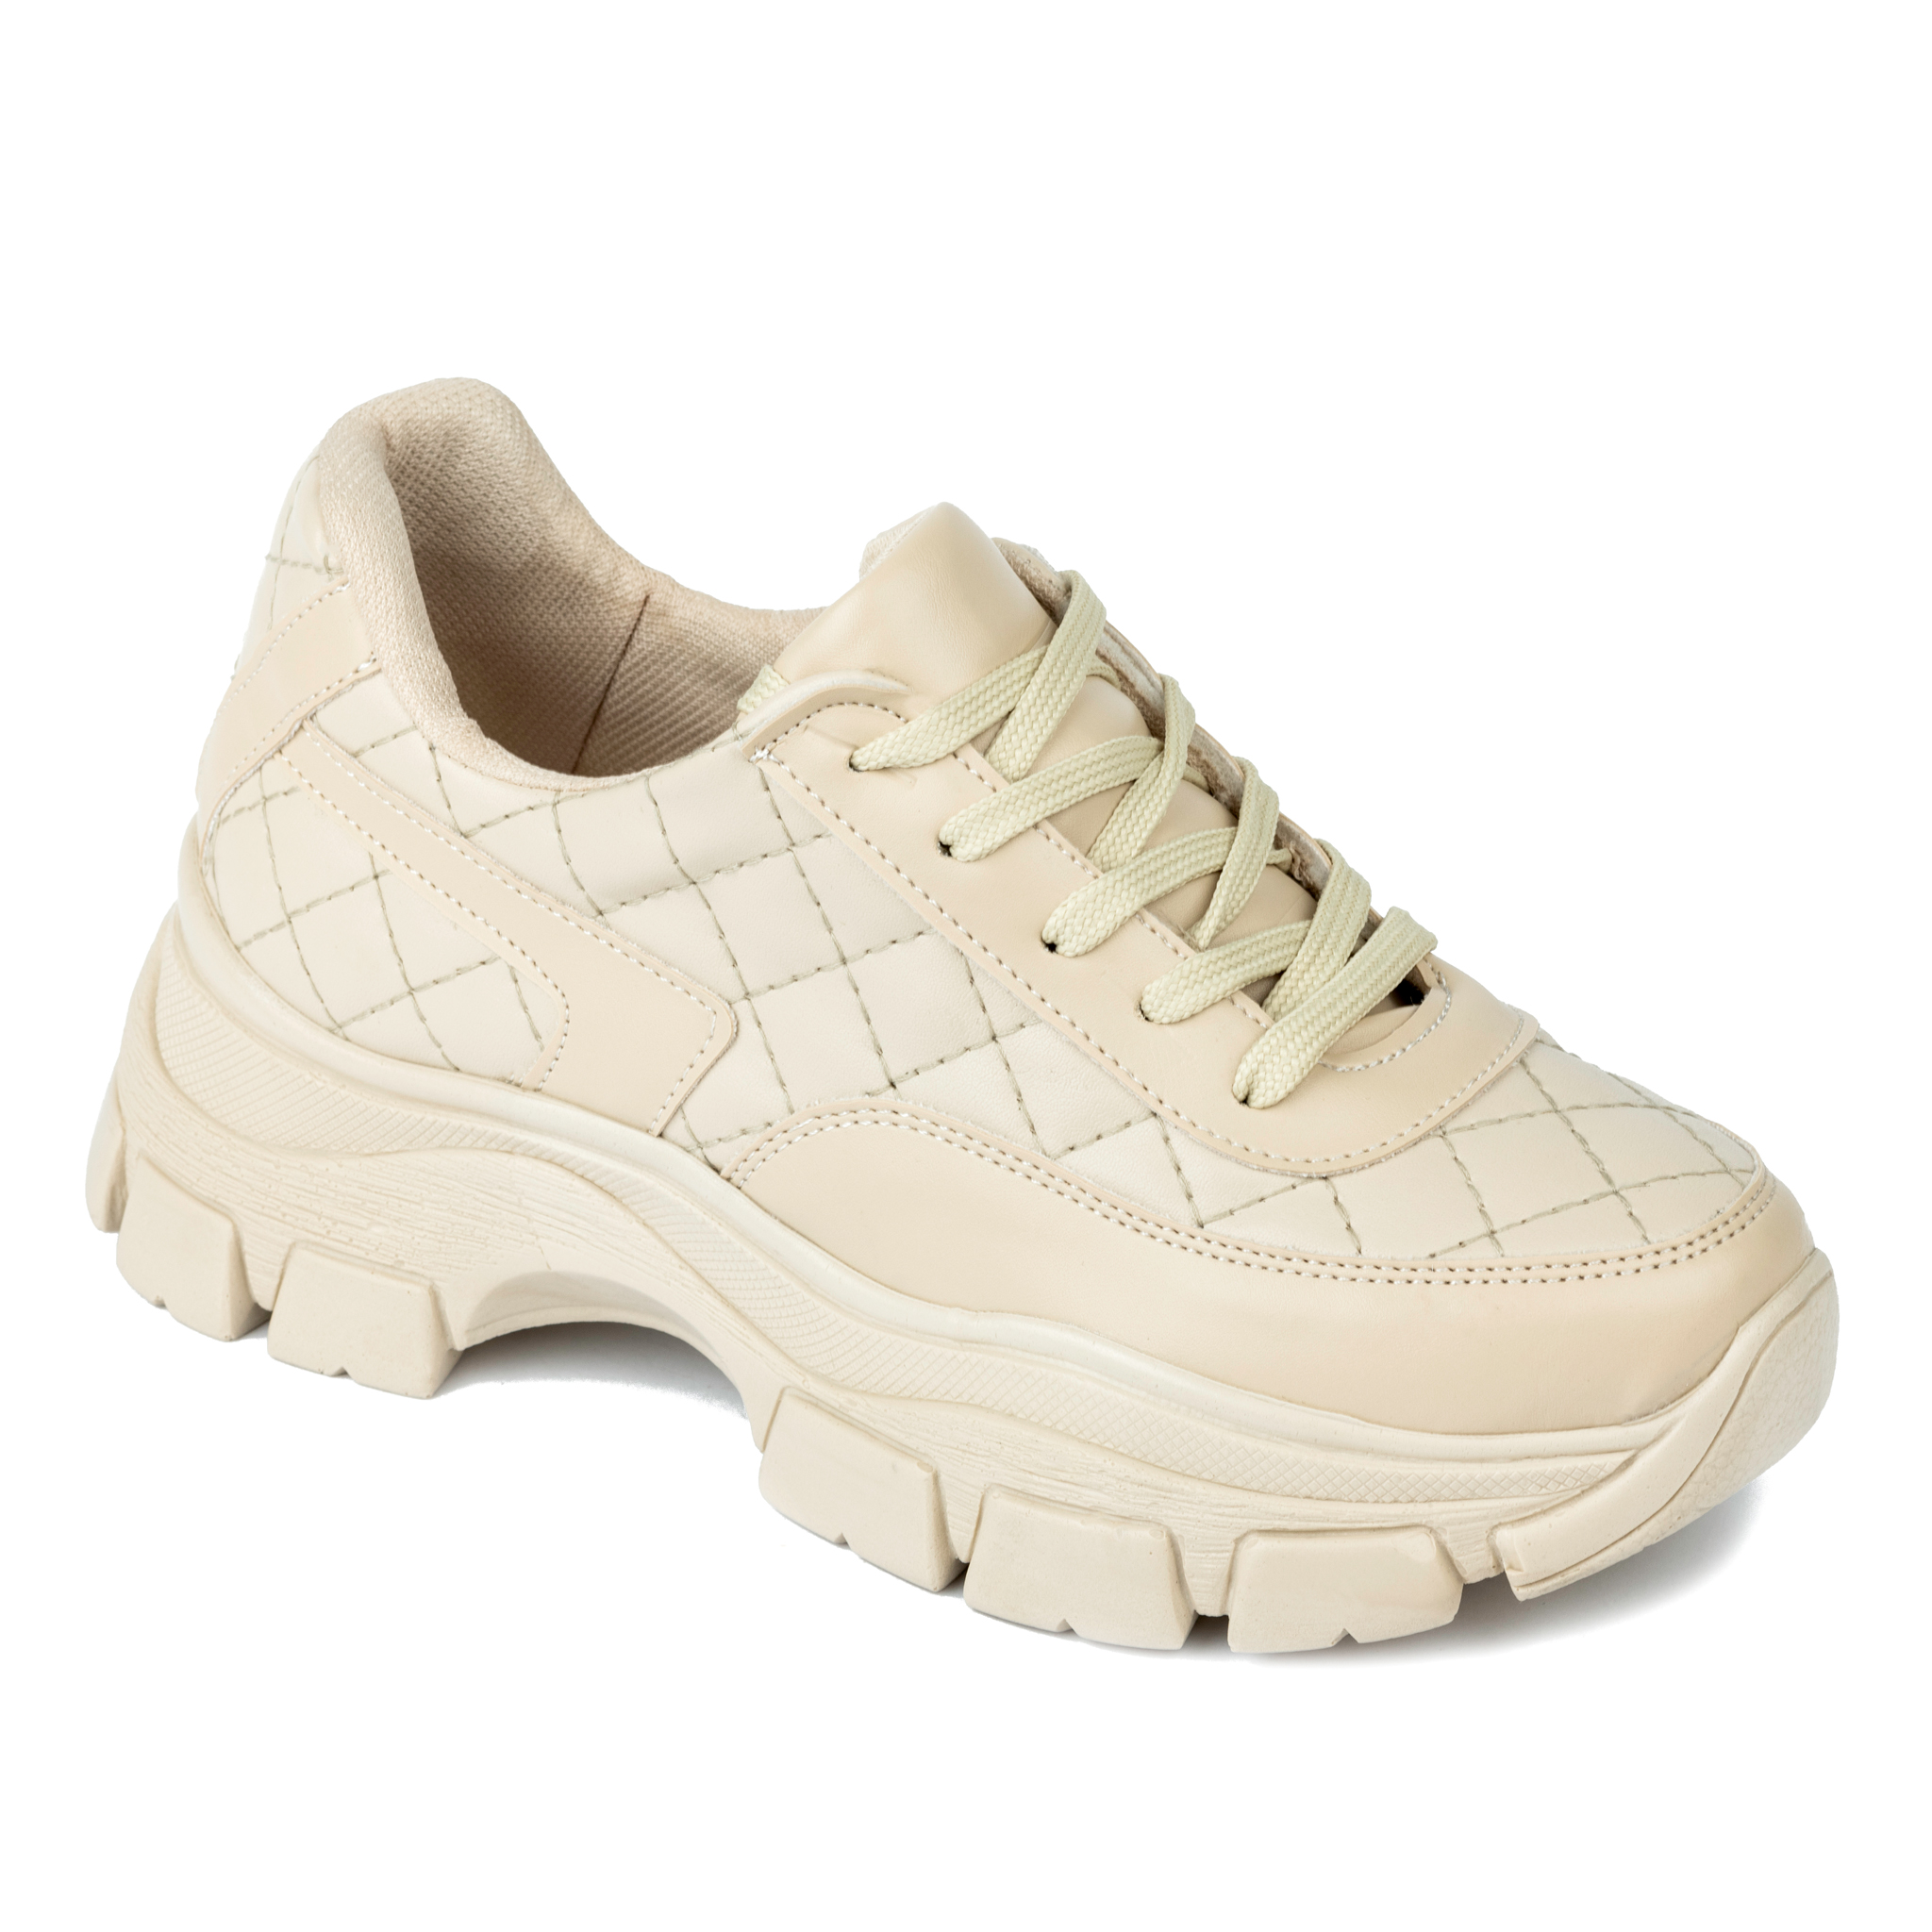 SAW LACE UP SNEAKERS - BEIGE